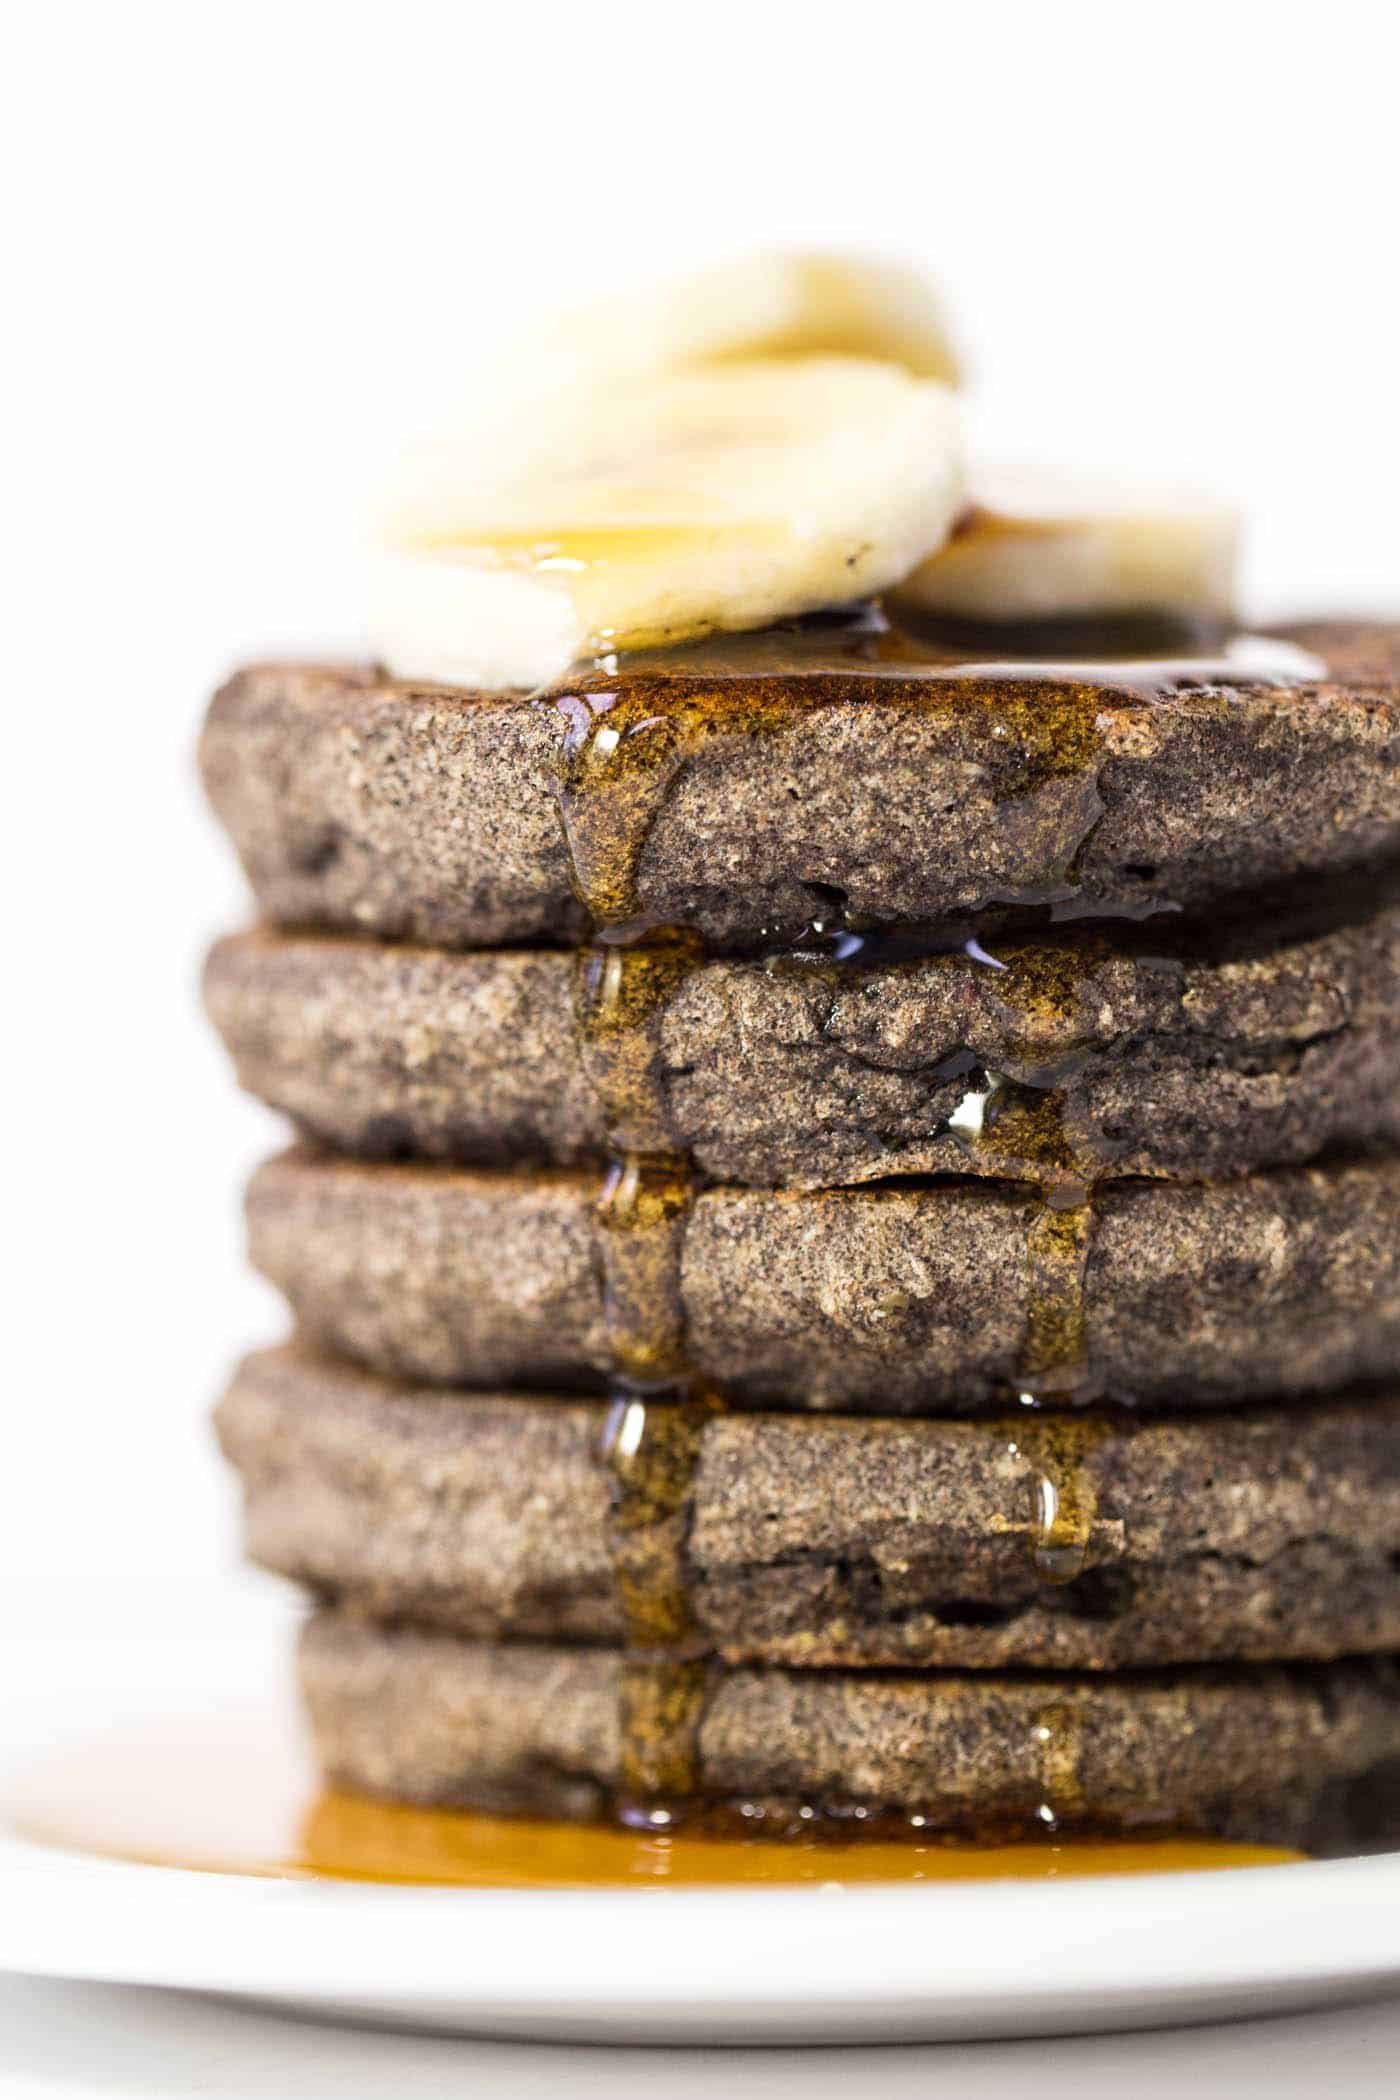 These Banana Buckwheat Quinoa Pancakes are SUPER fluffy, hearty and oh so healthy!